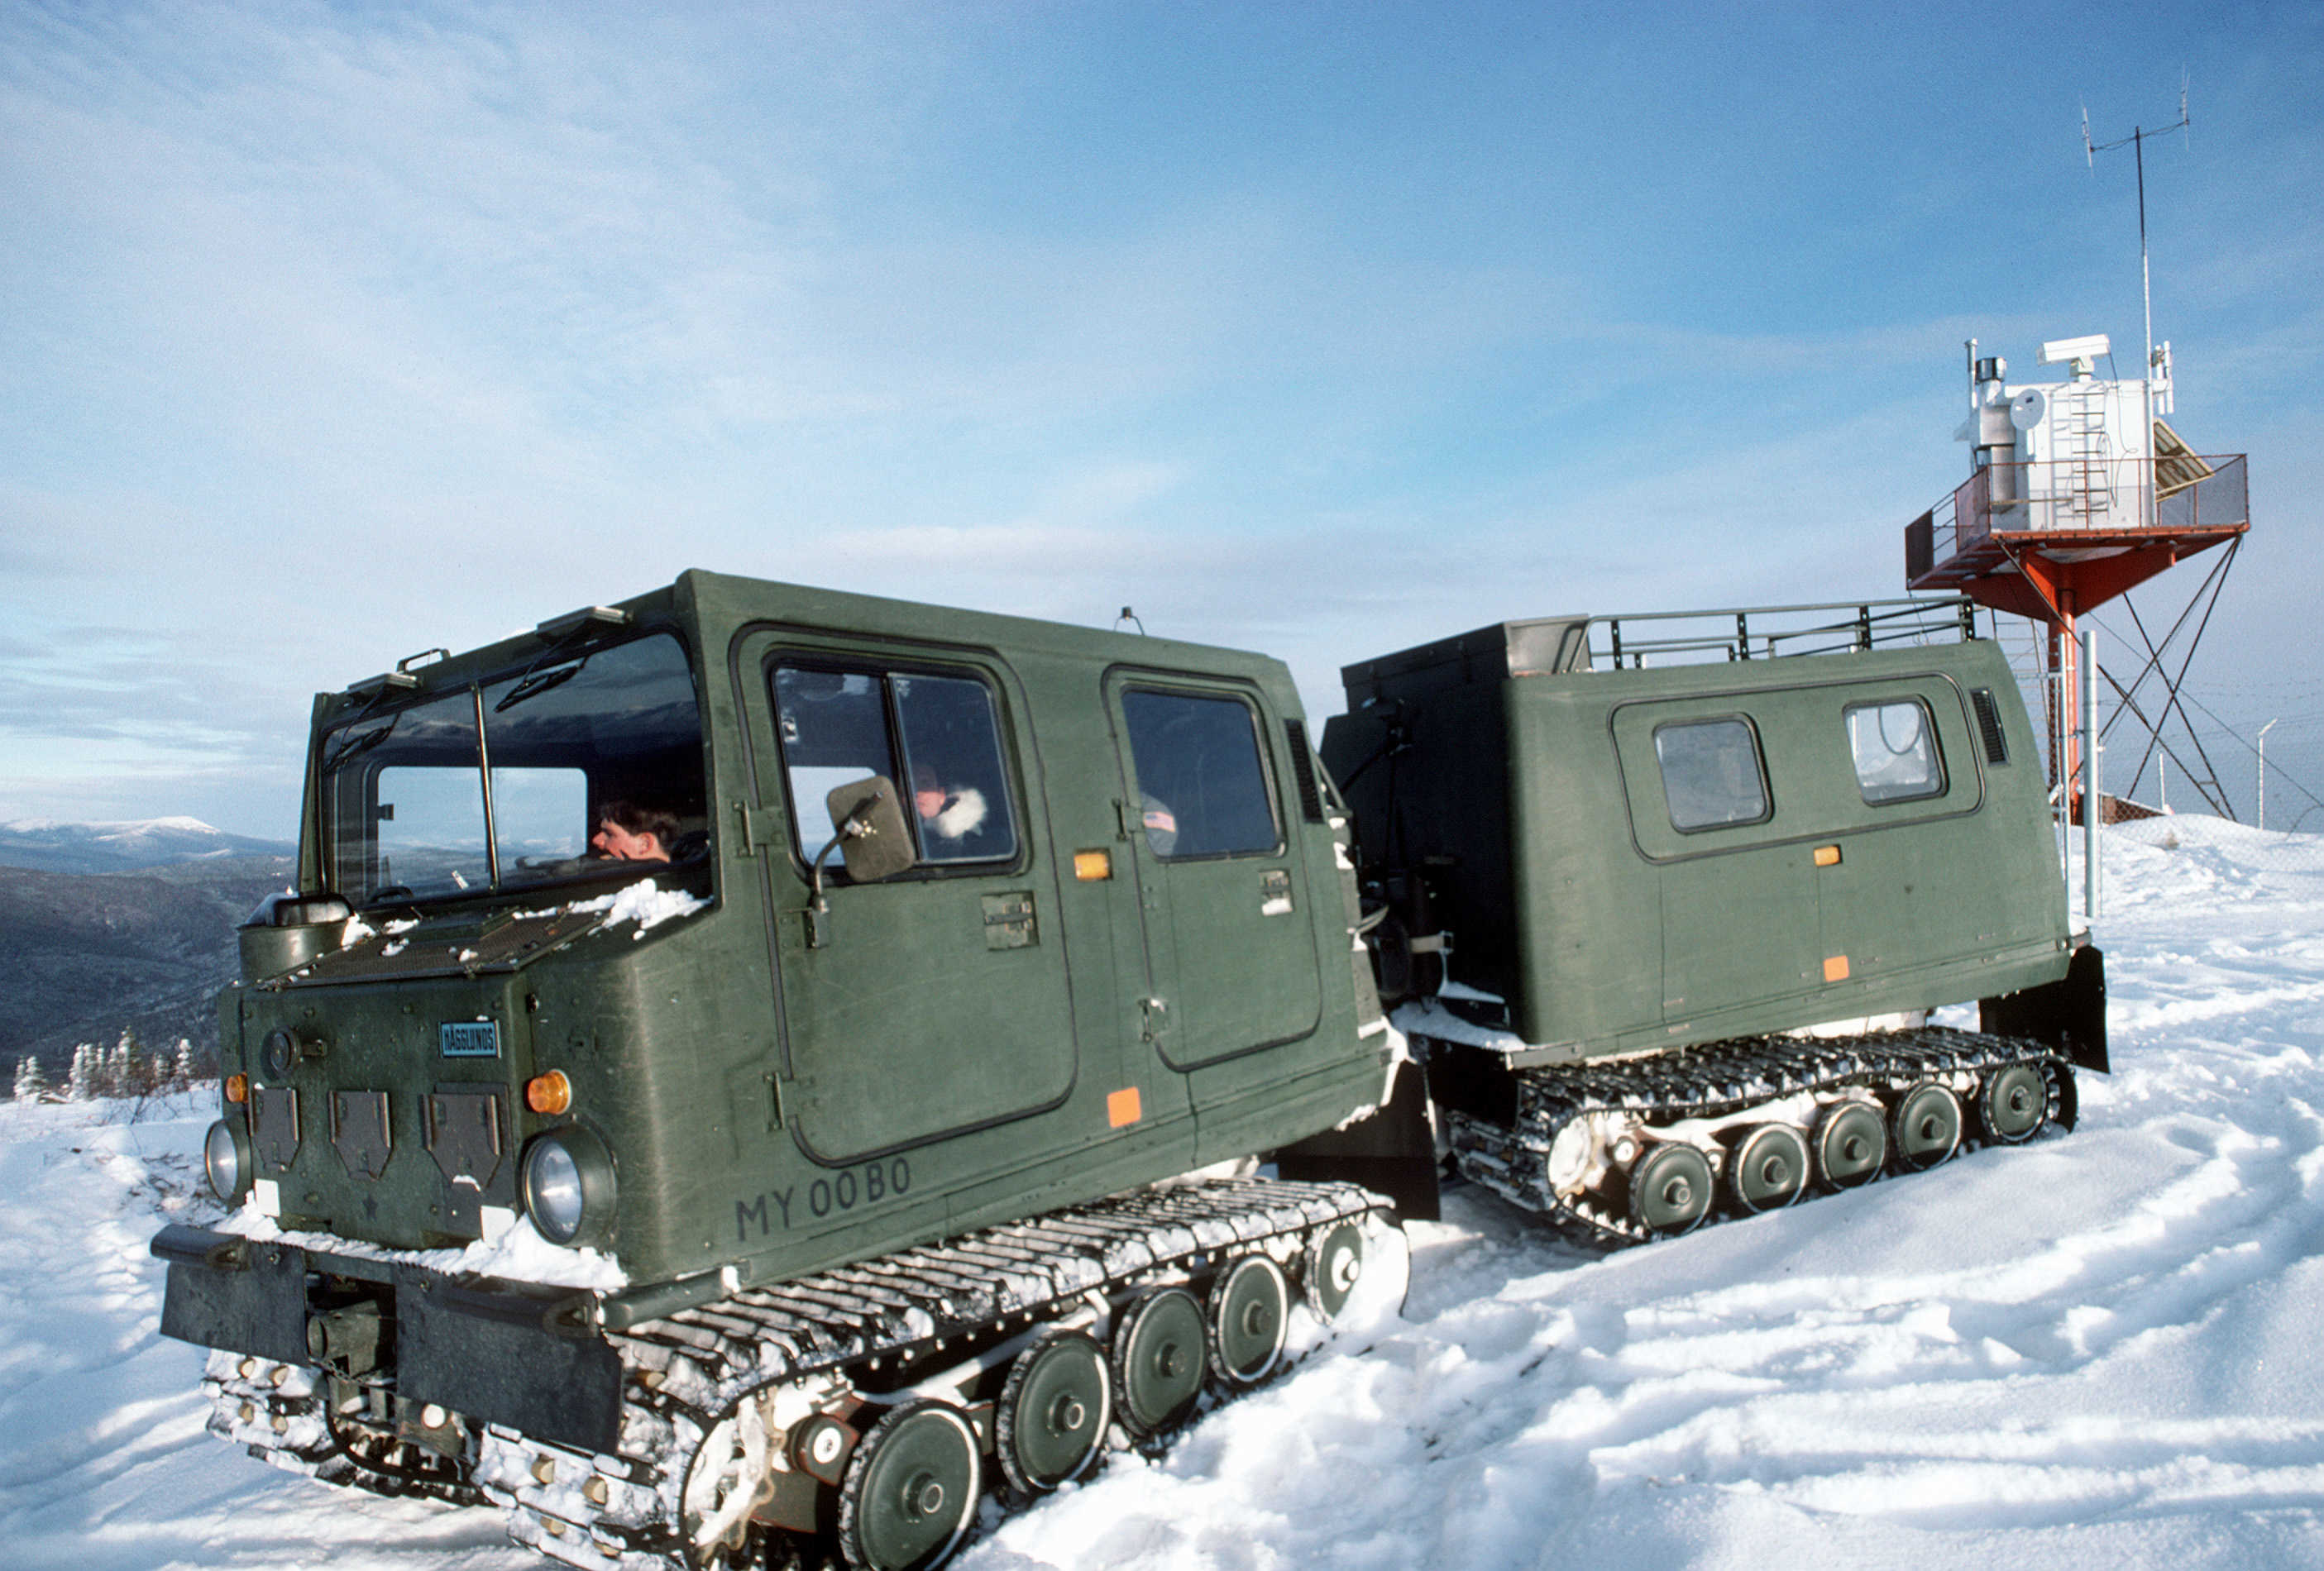 Maintenance personnel from the 5055th Range Squadron drive an M-973 small unit support vehicle through the snow.